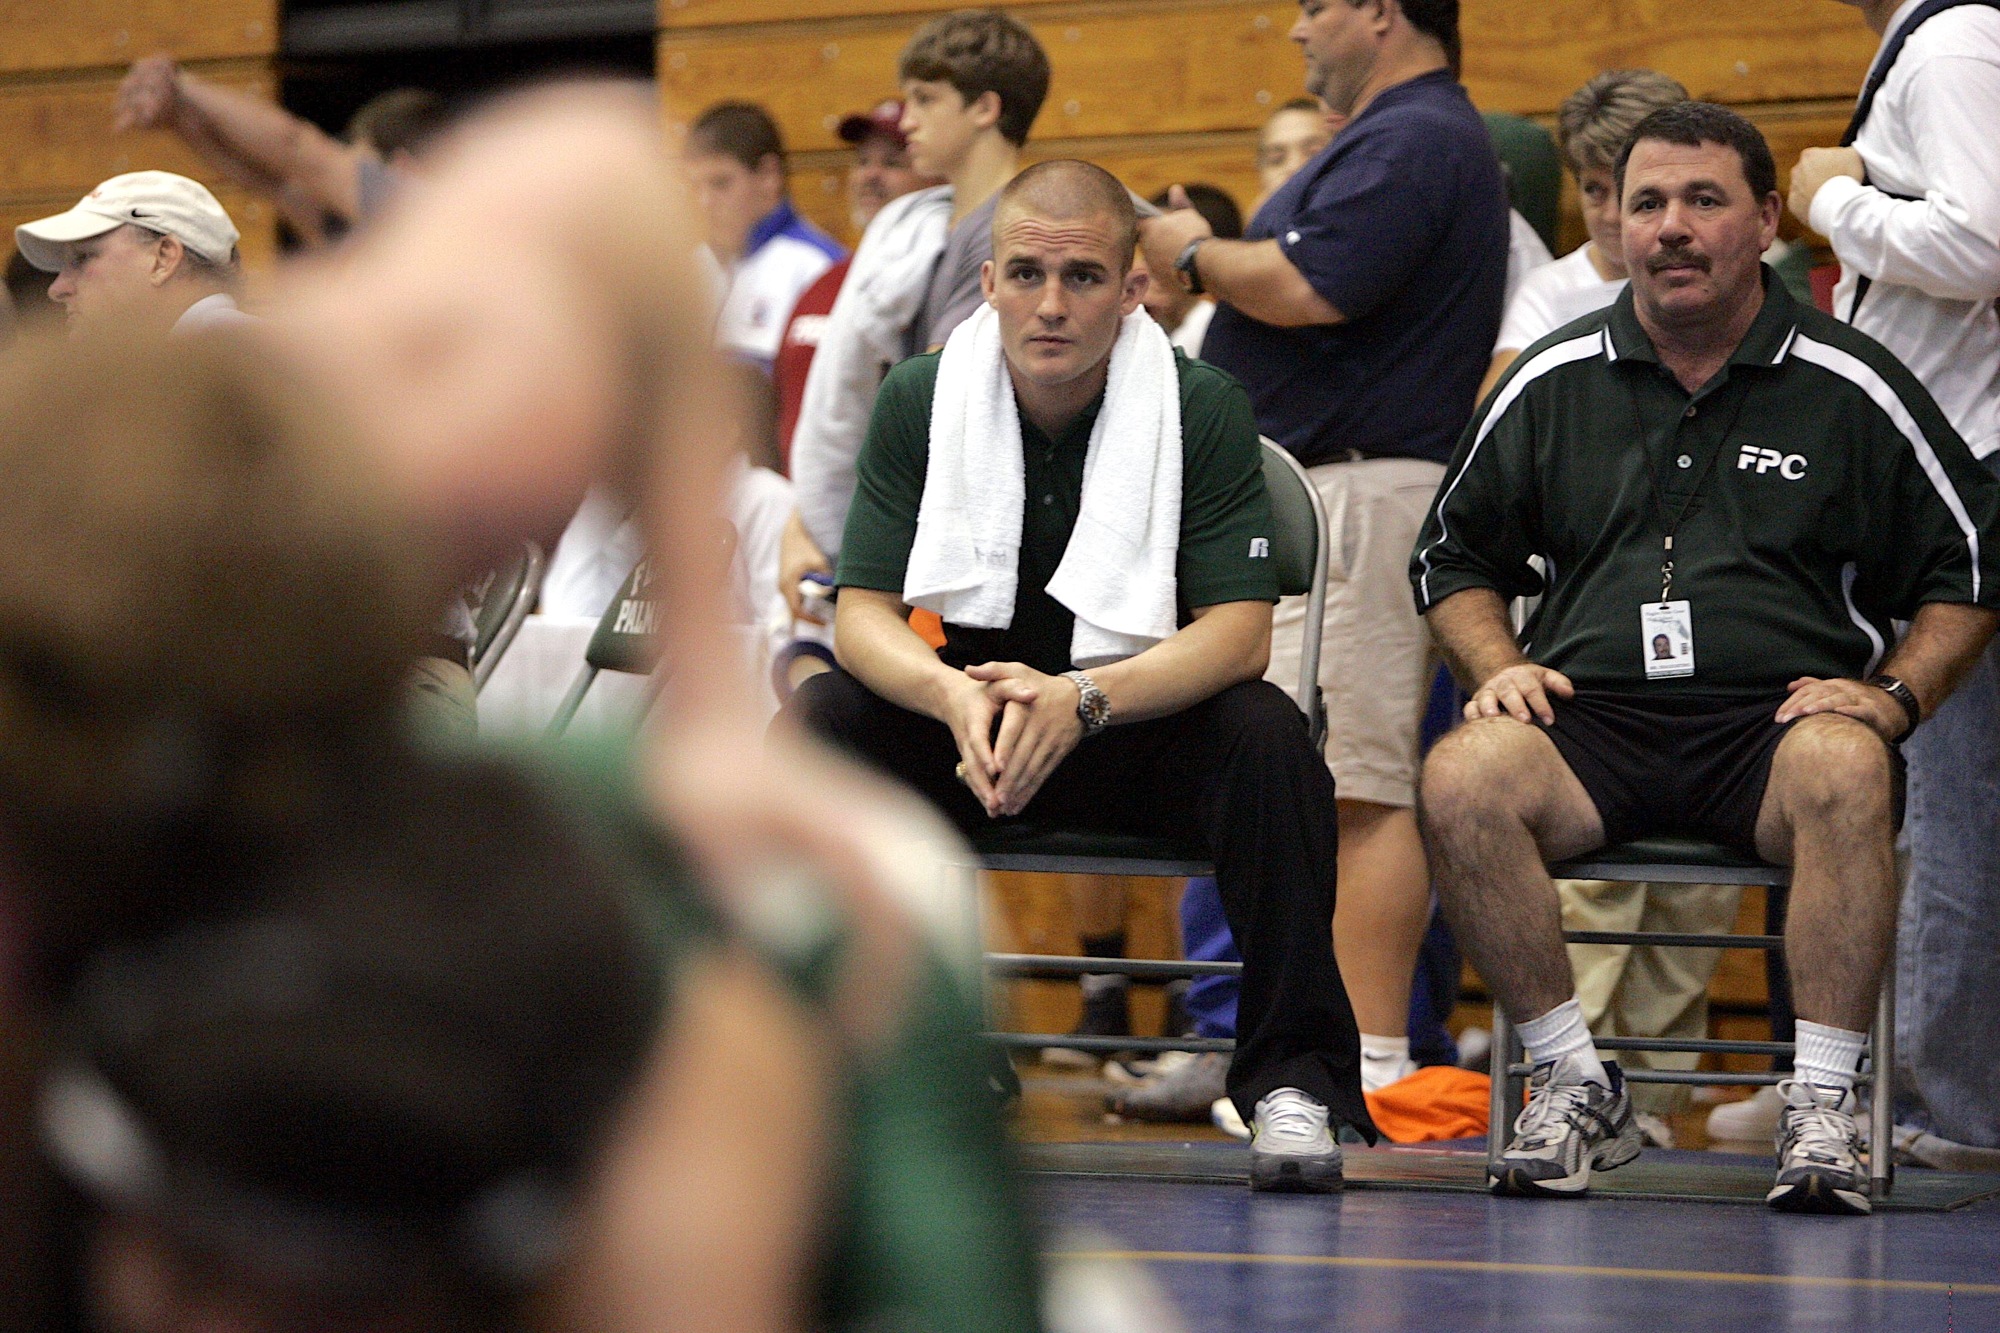 While a wrestling coach at FPC, Bossardet learned that coaching was all about relationships and that not everyone had the same goals.